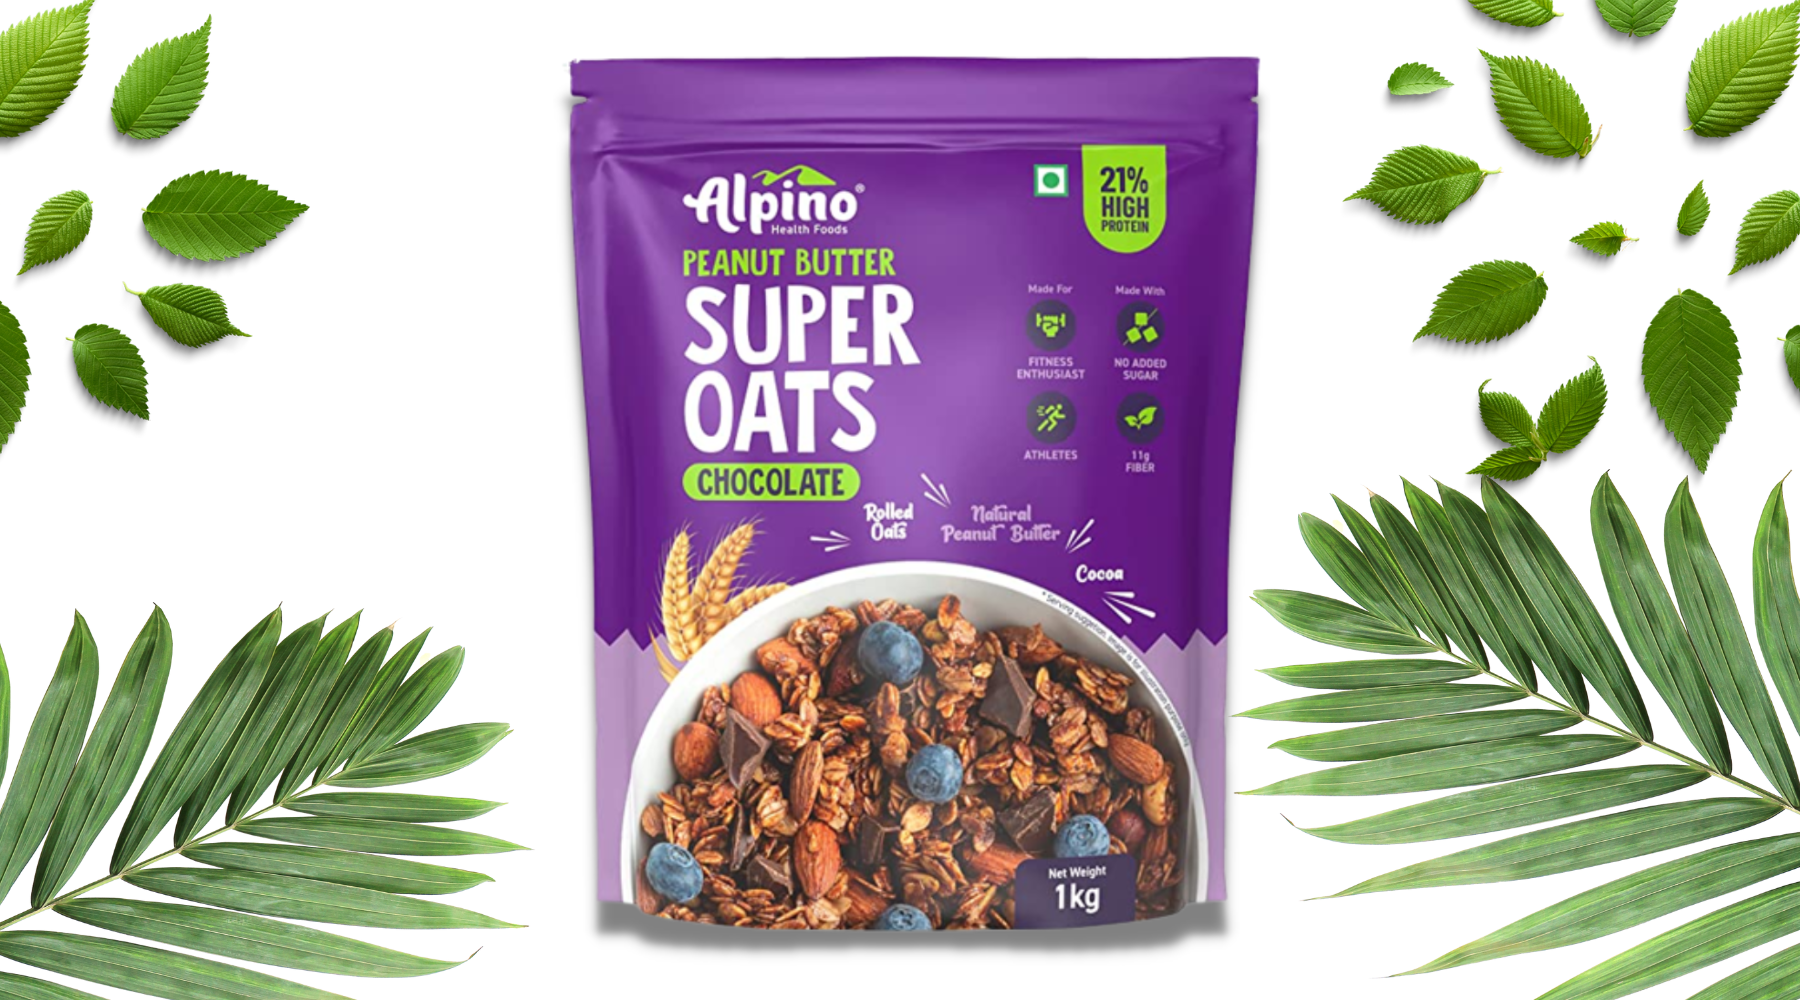 Alpino Peanut Butter Super Oats with Chocolate: A Review of nutritional information